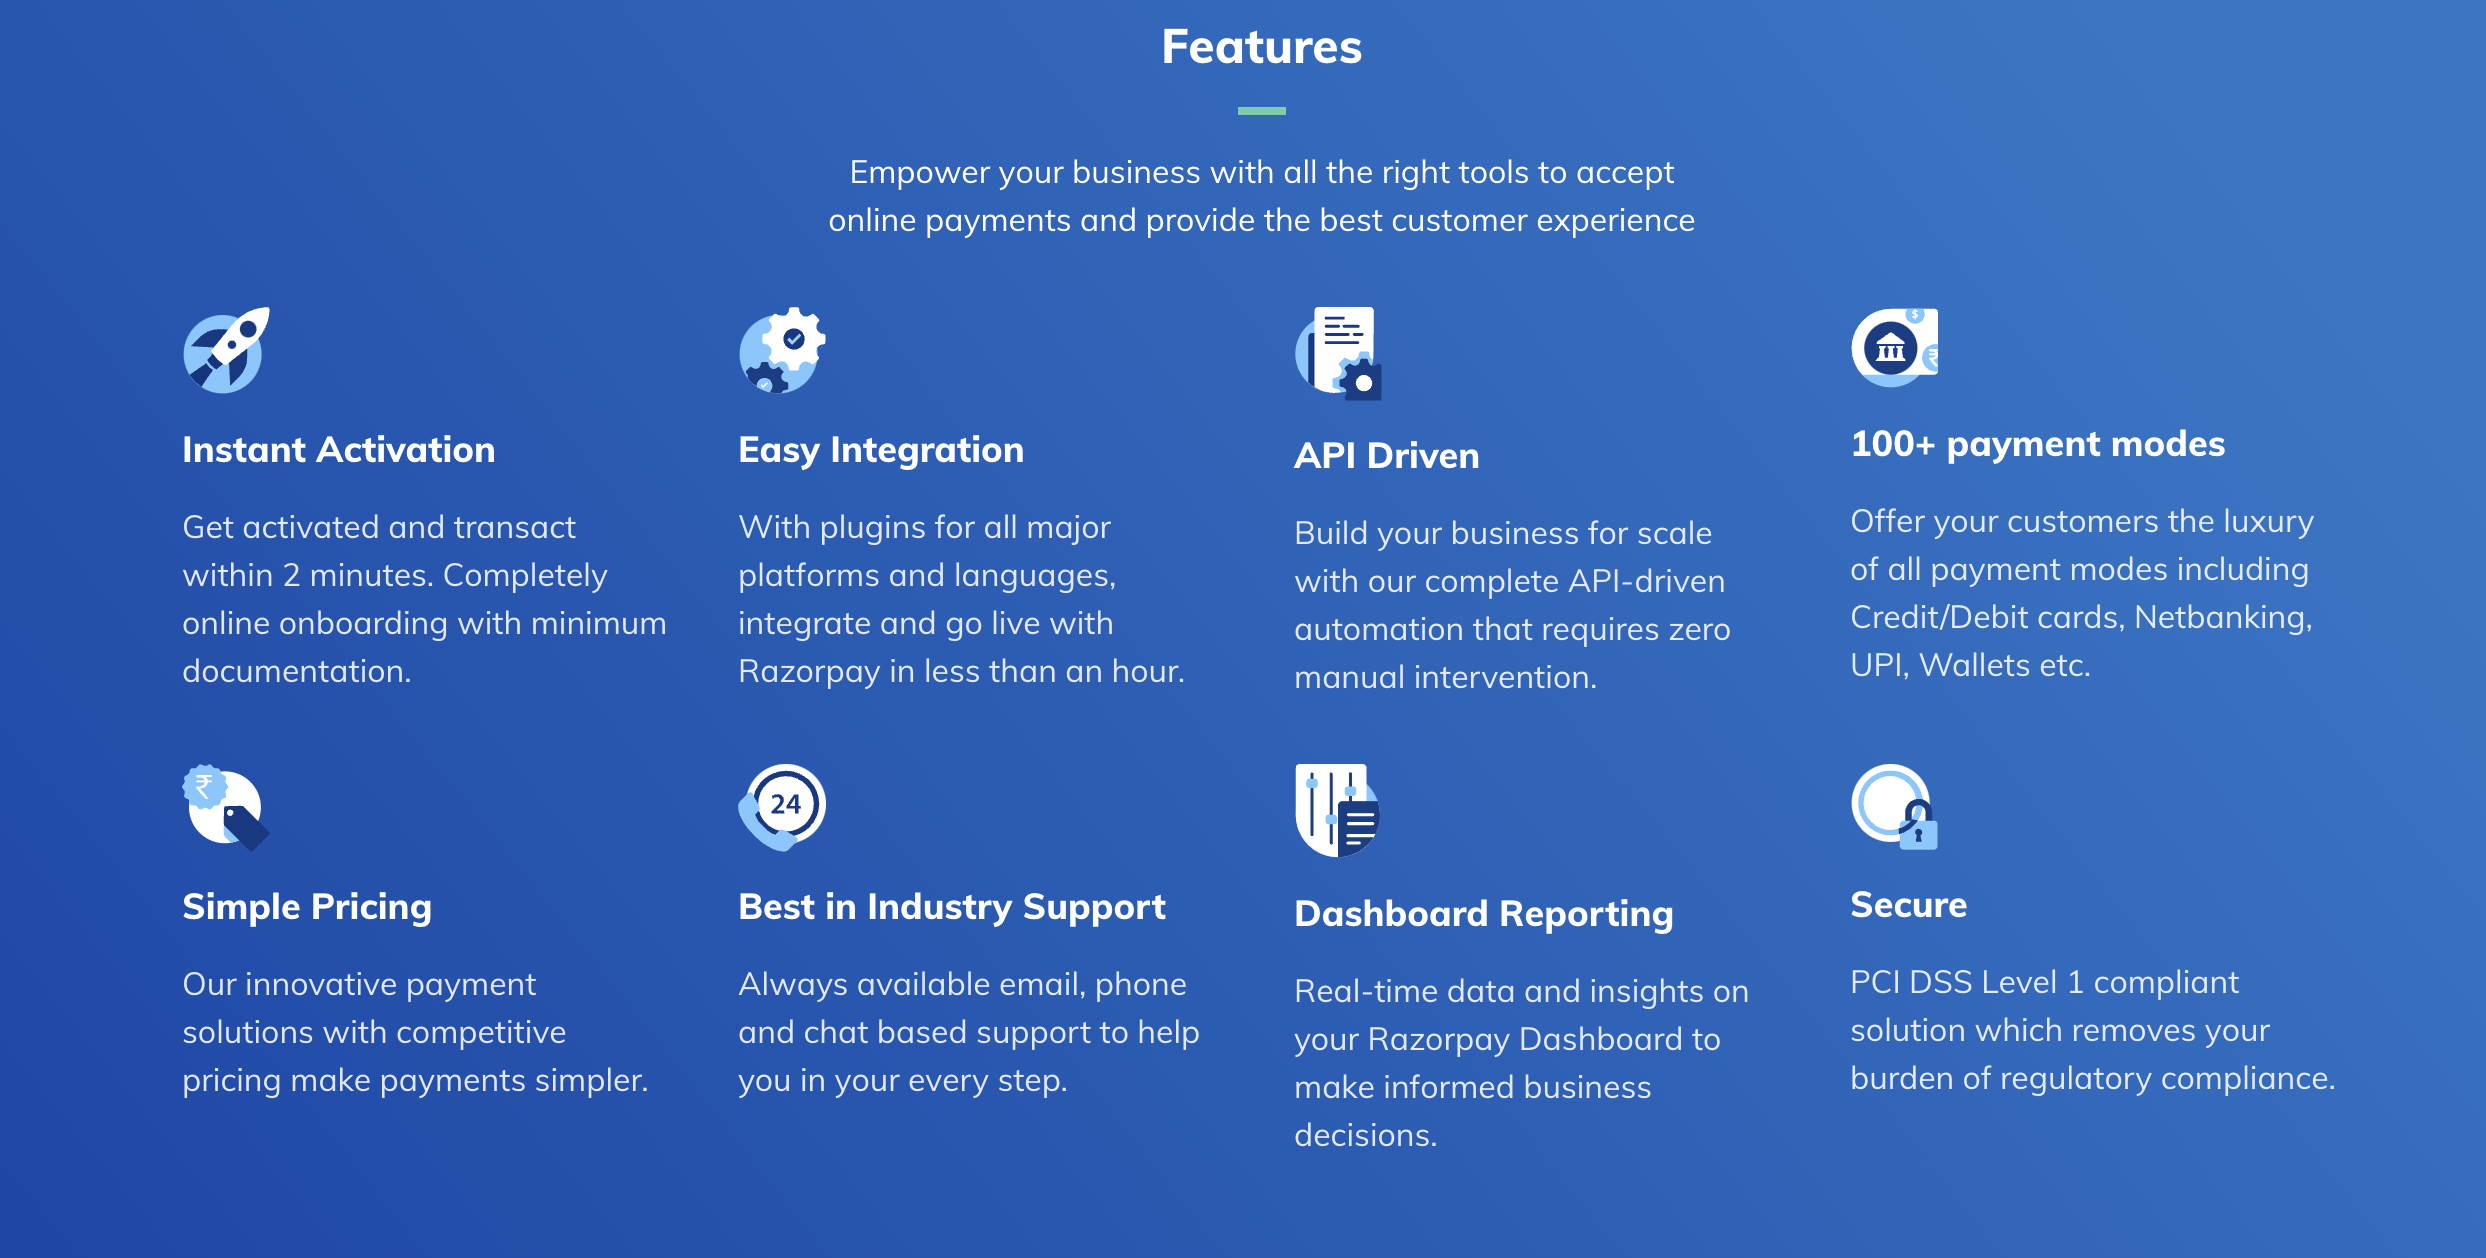 features of Razorpay products